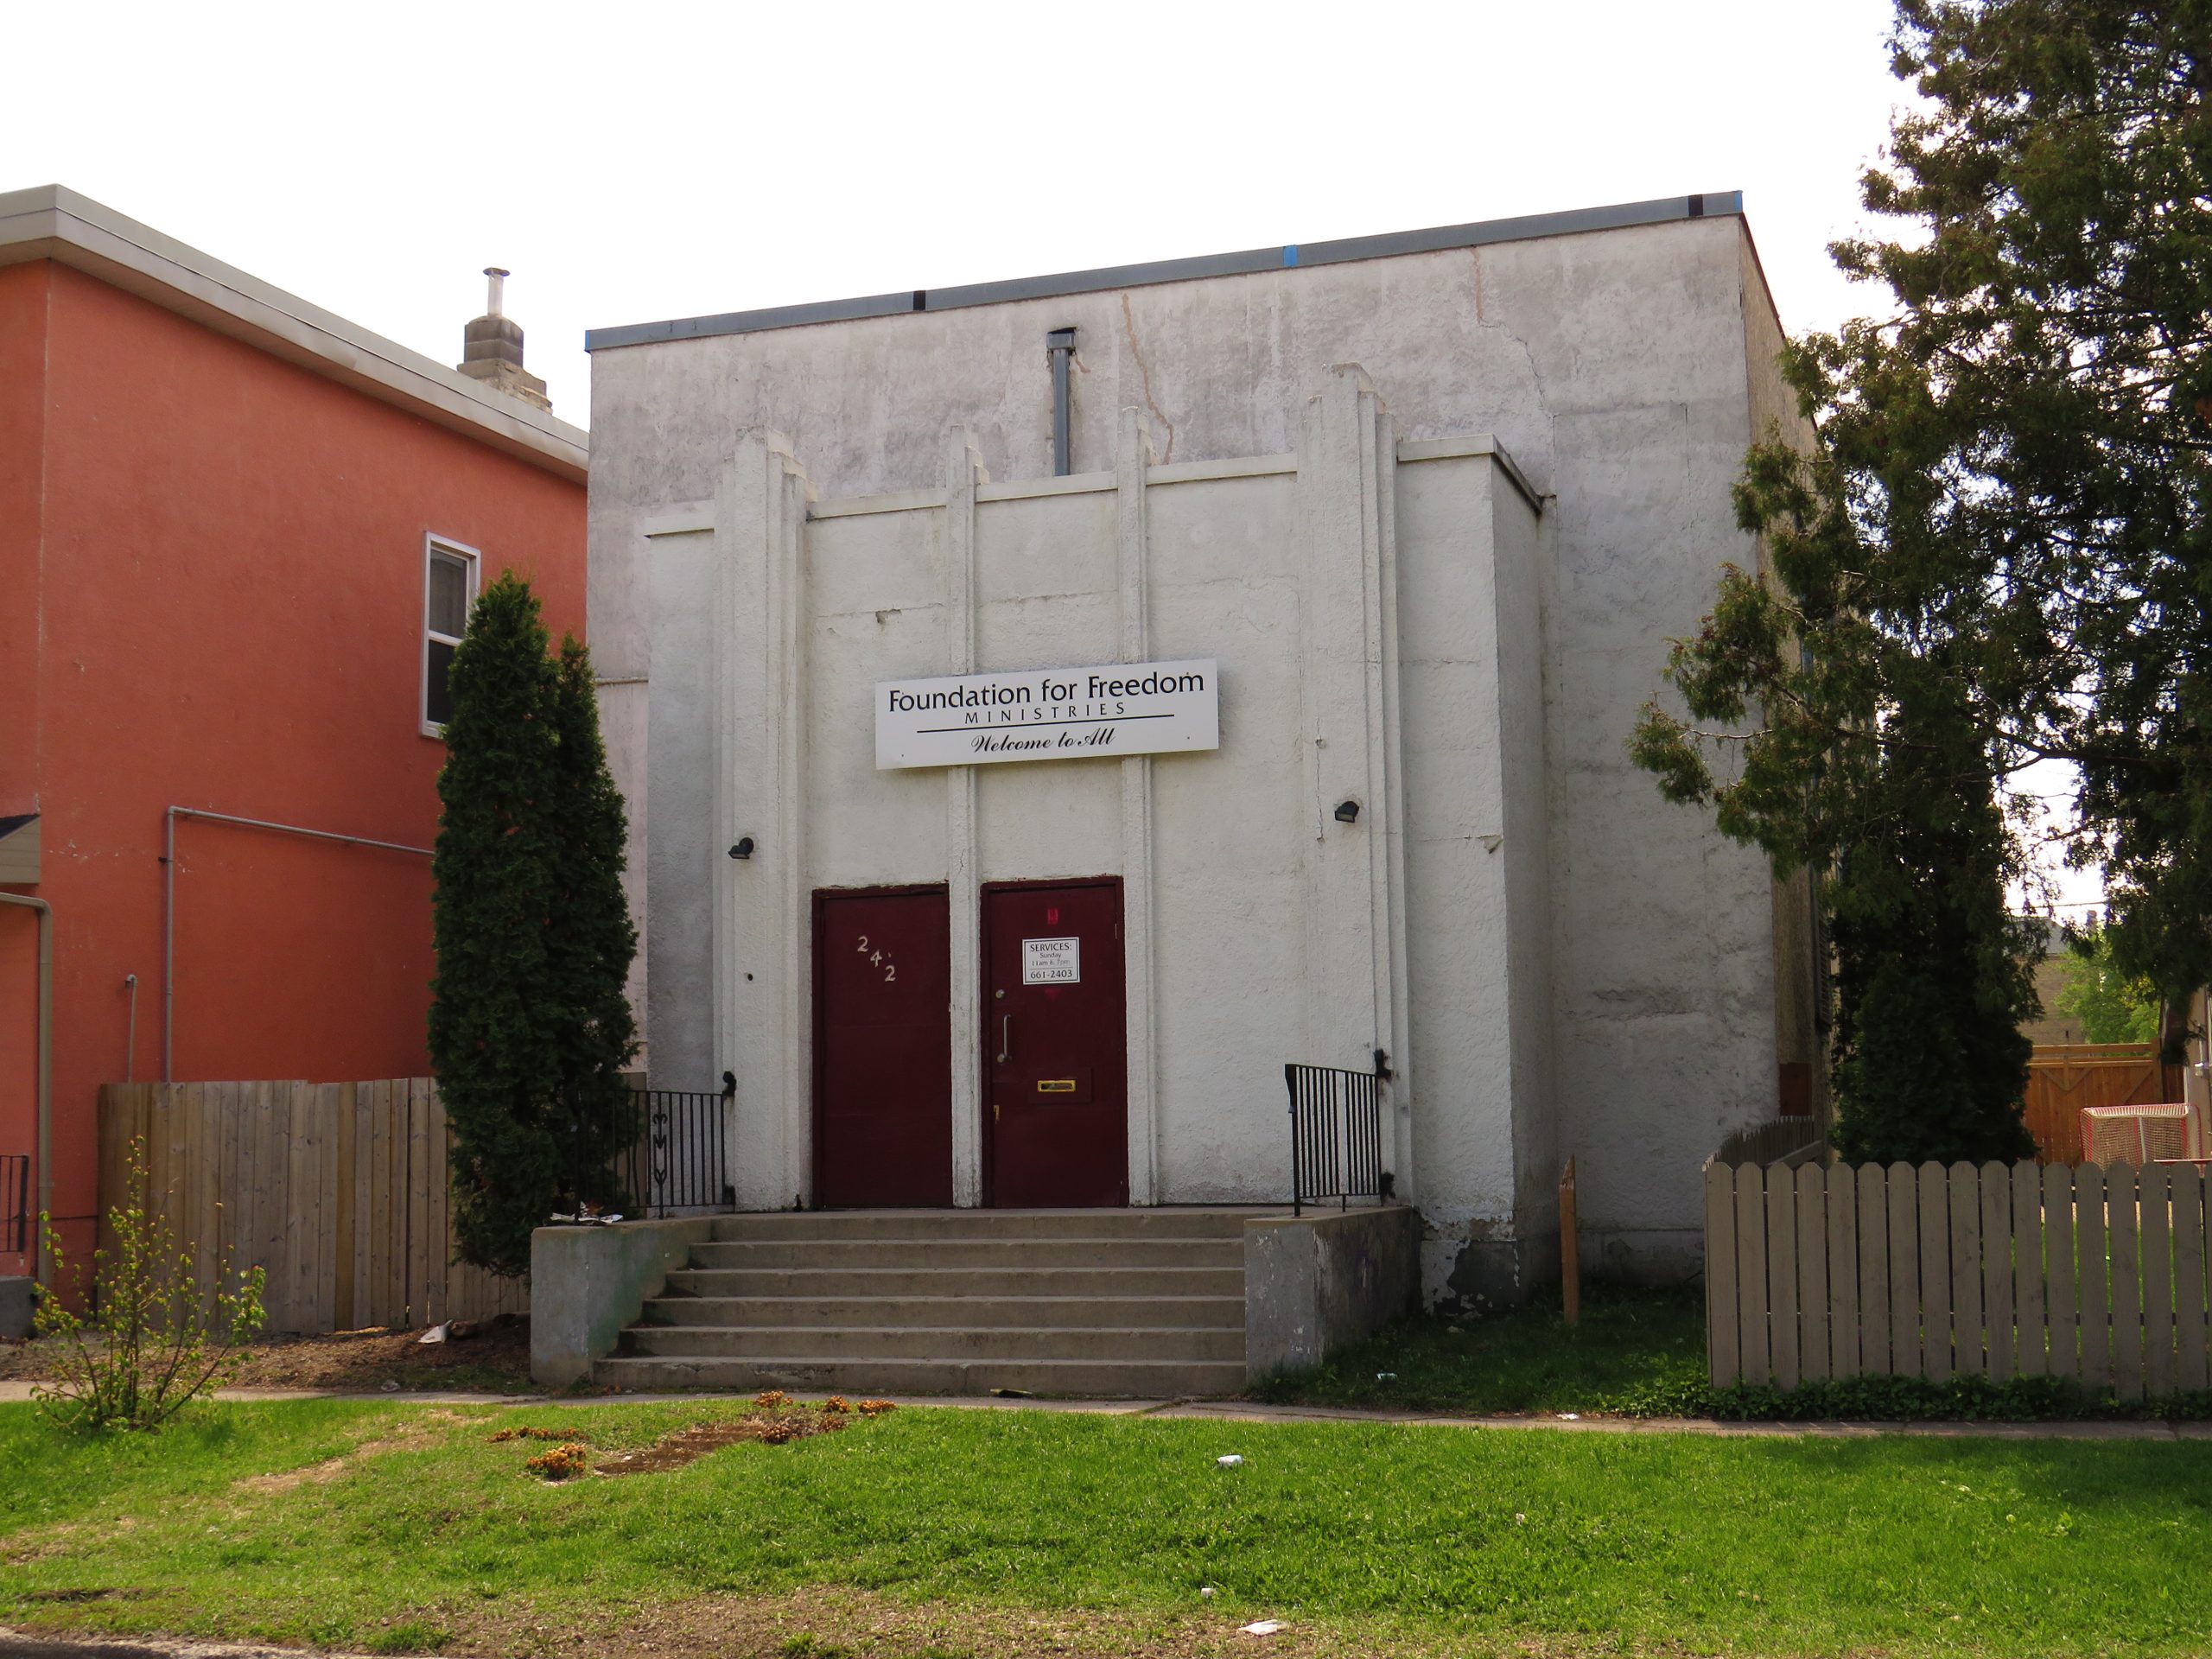 The exterior of 242 Manitoba Ave. The building is light grey stucco with no windows, and the two front doors are red. There is a sign above the doors that says "Foundation for Freedom Ministries - Welcome to All".